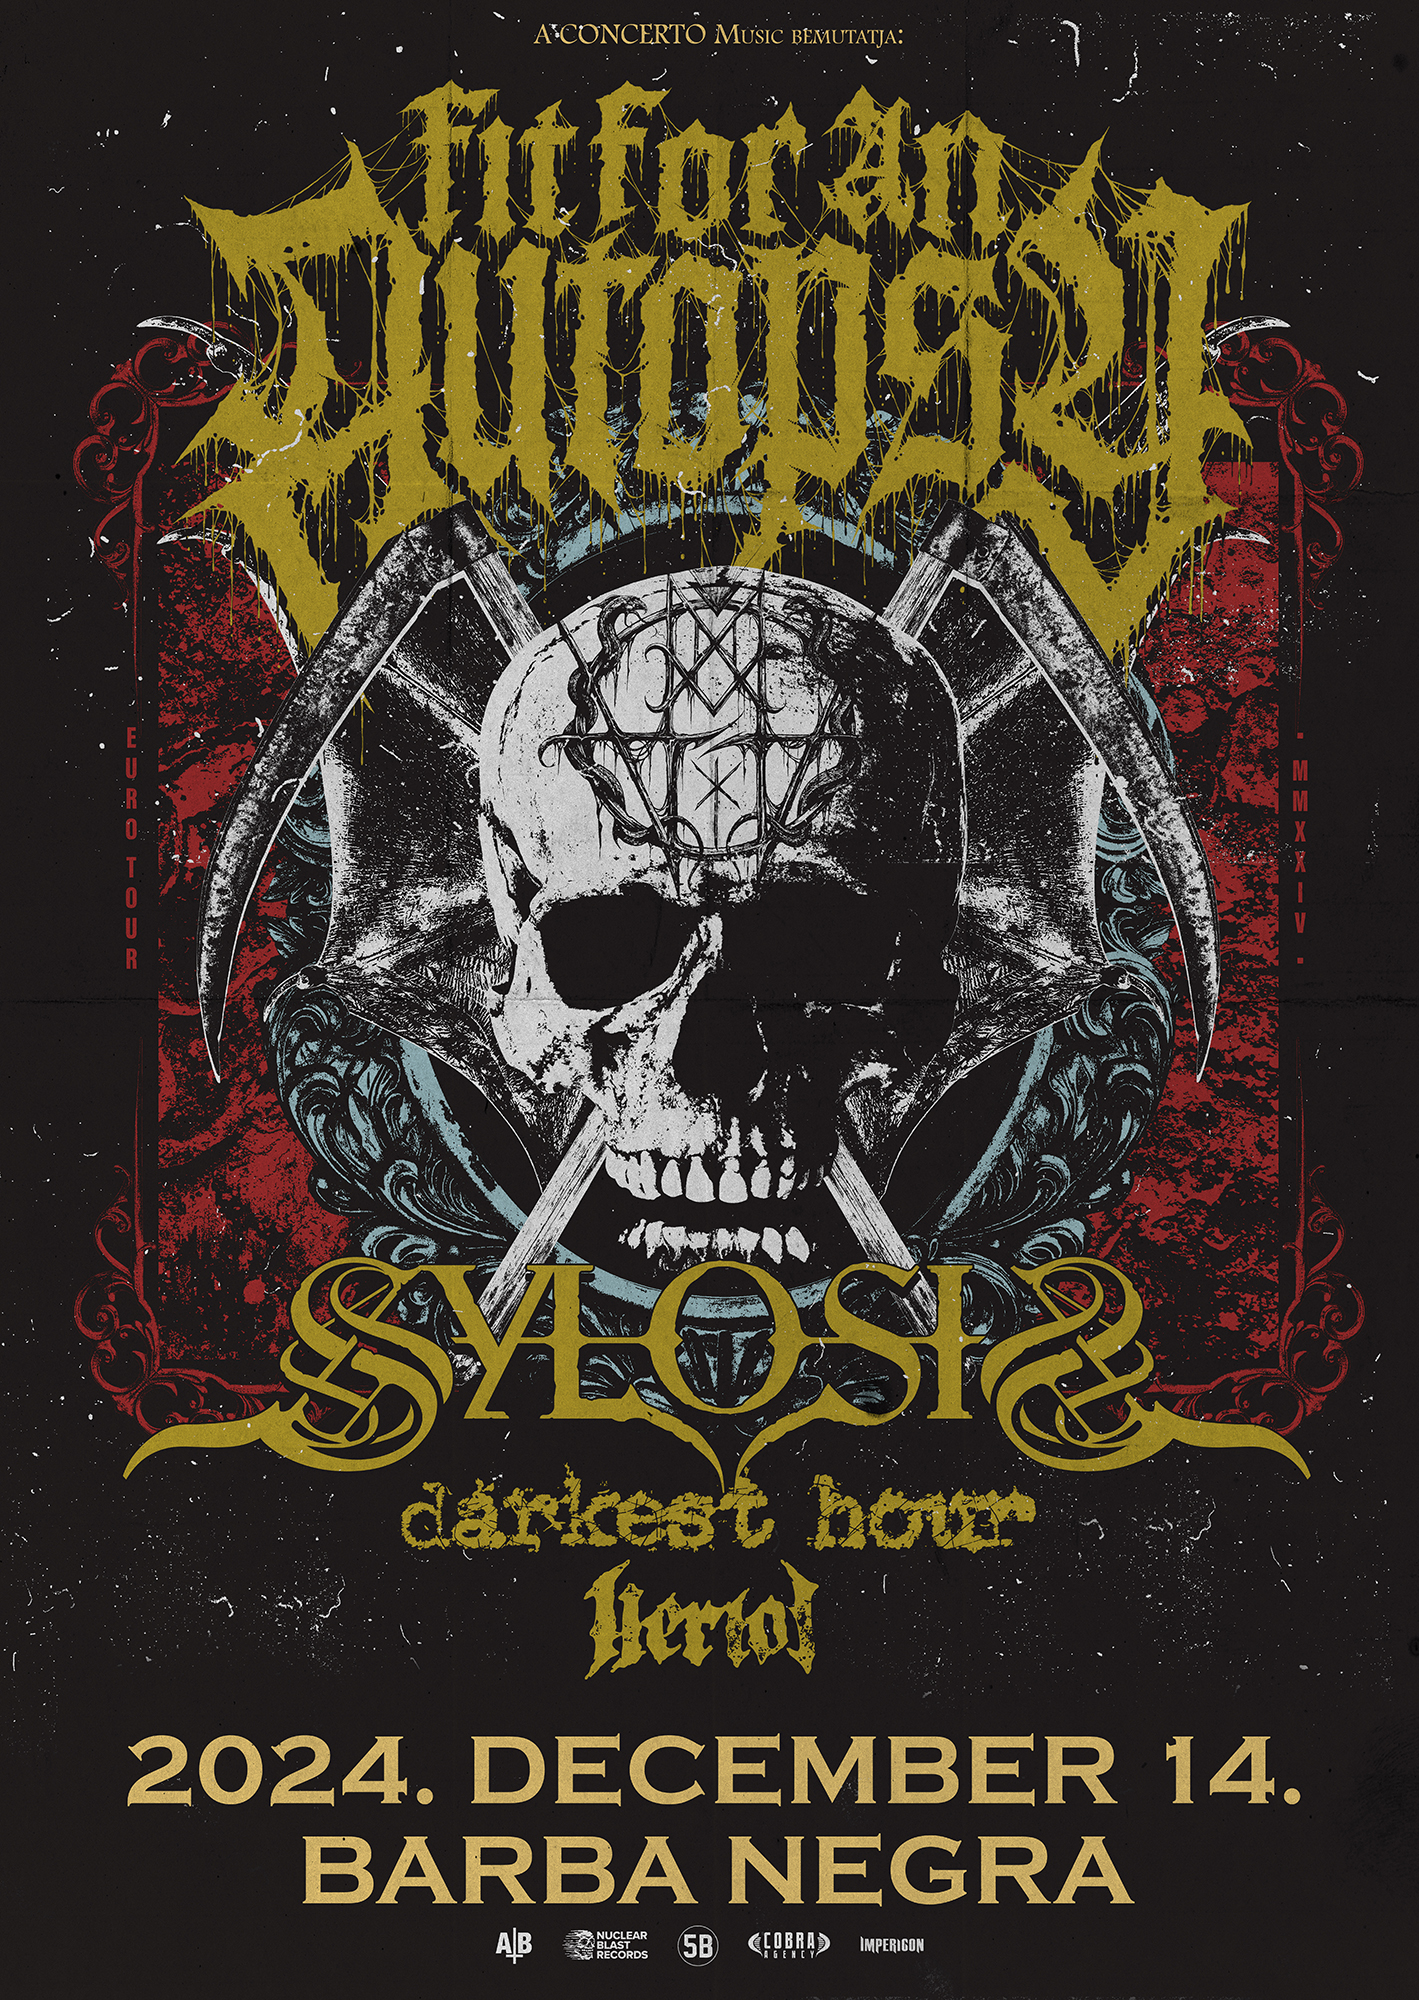 Fit for an Autopsy, Sylosis, Darkest Hour, Heriot